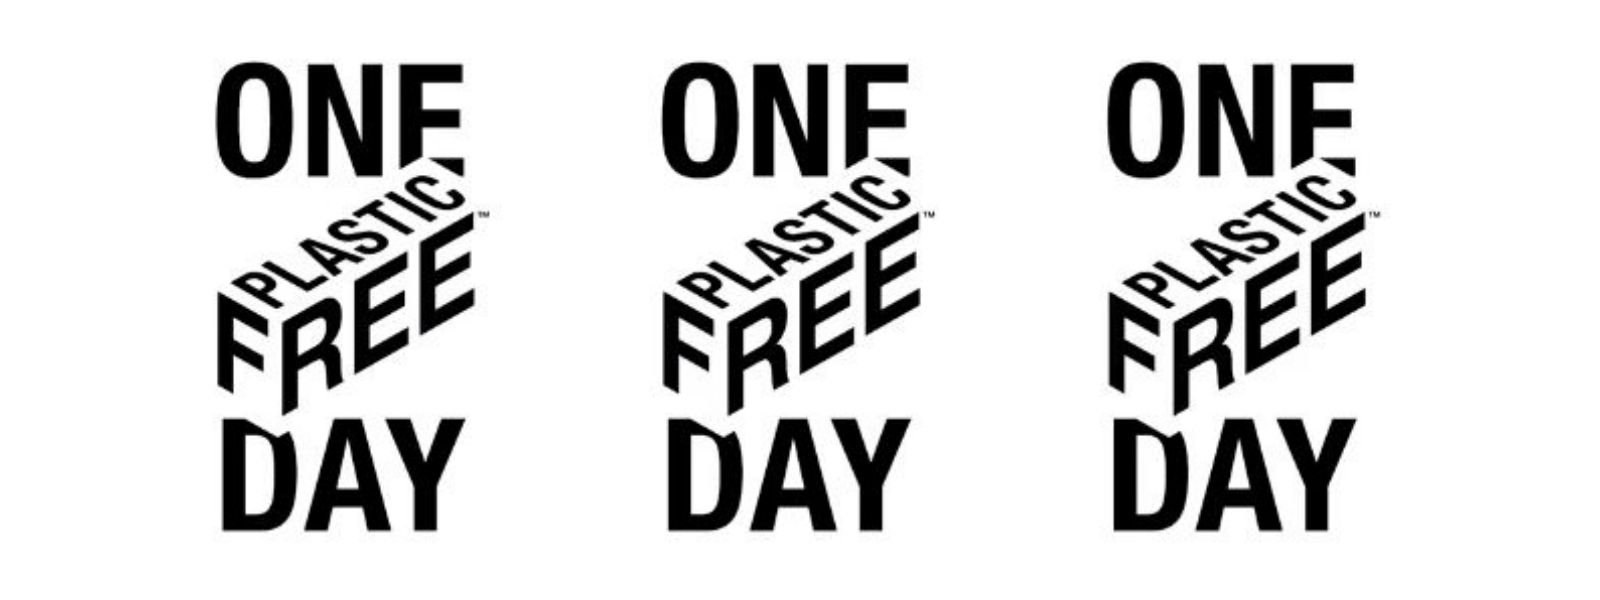 World's first One Plastic Free Day falls on June 5